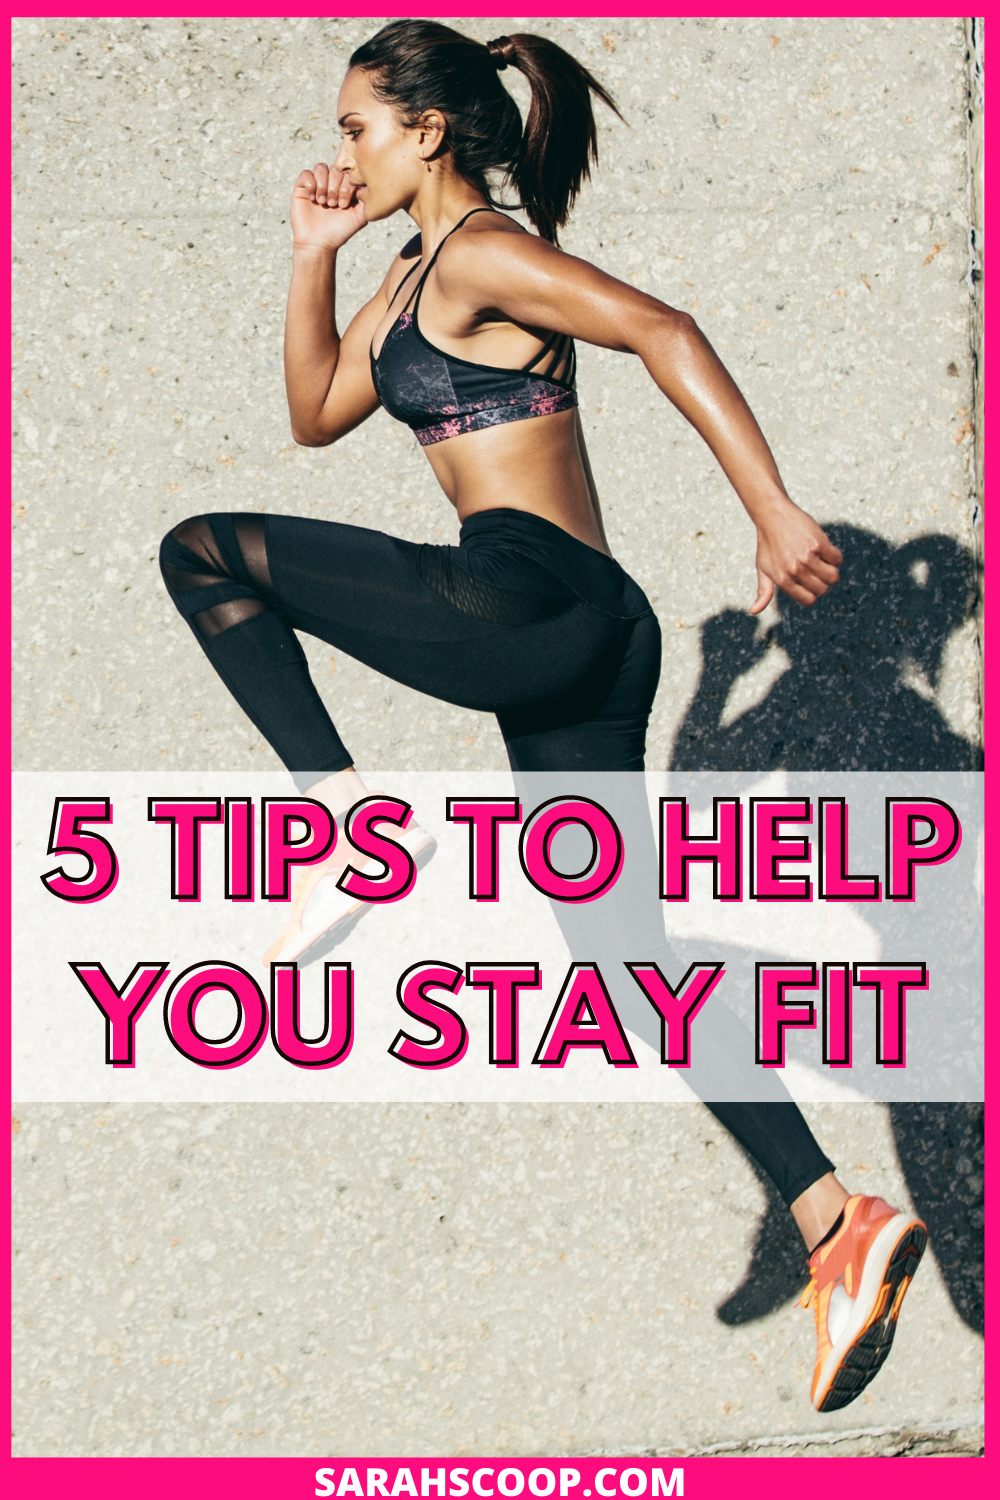 5 tips to help you maintain a fit lifestyle.